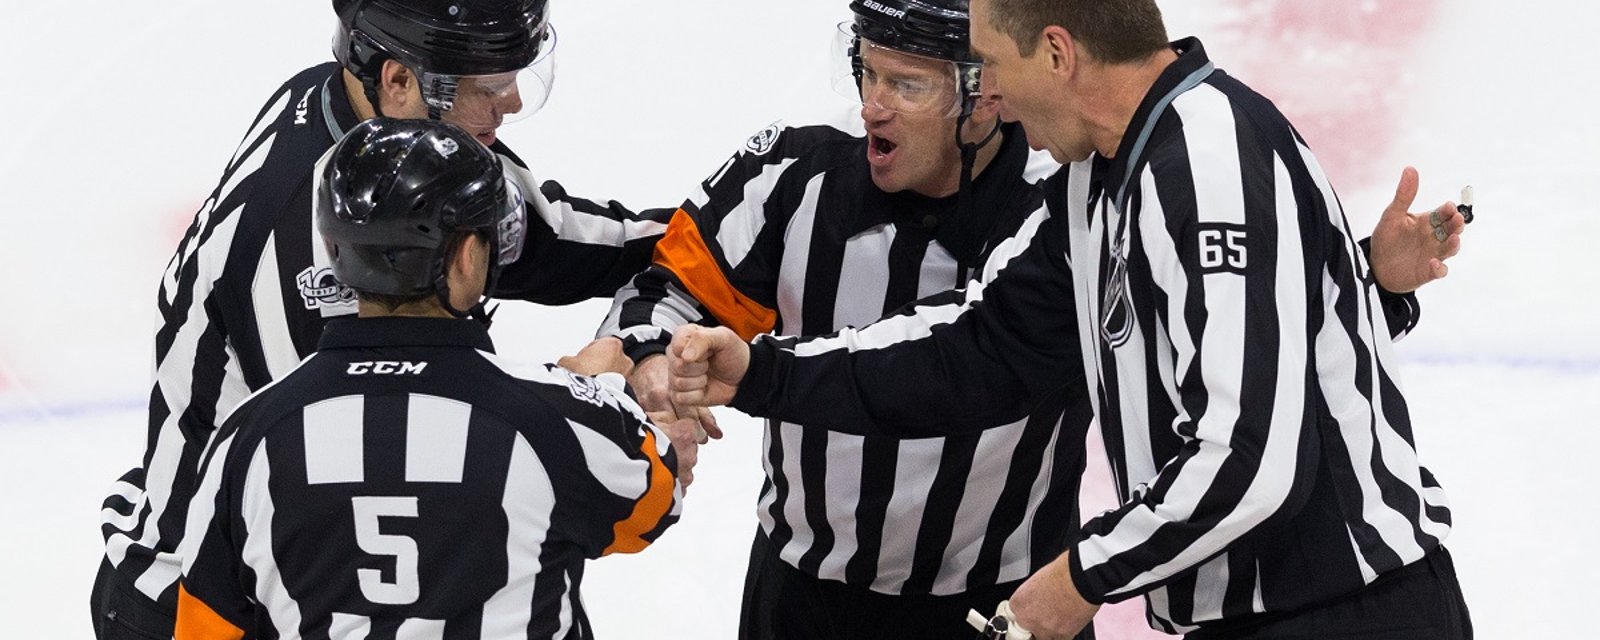 Refs intervene over questionable act from Leafs after Game 1.